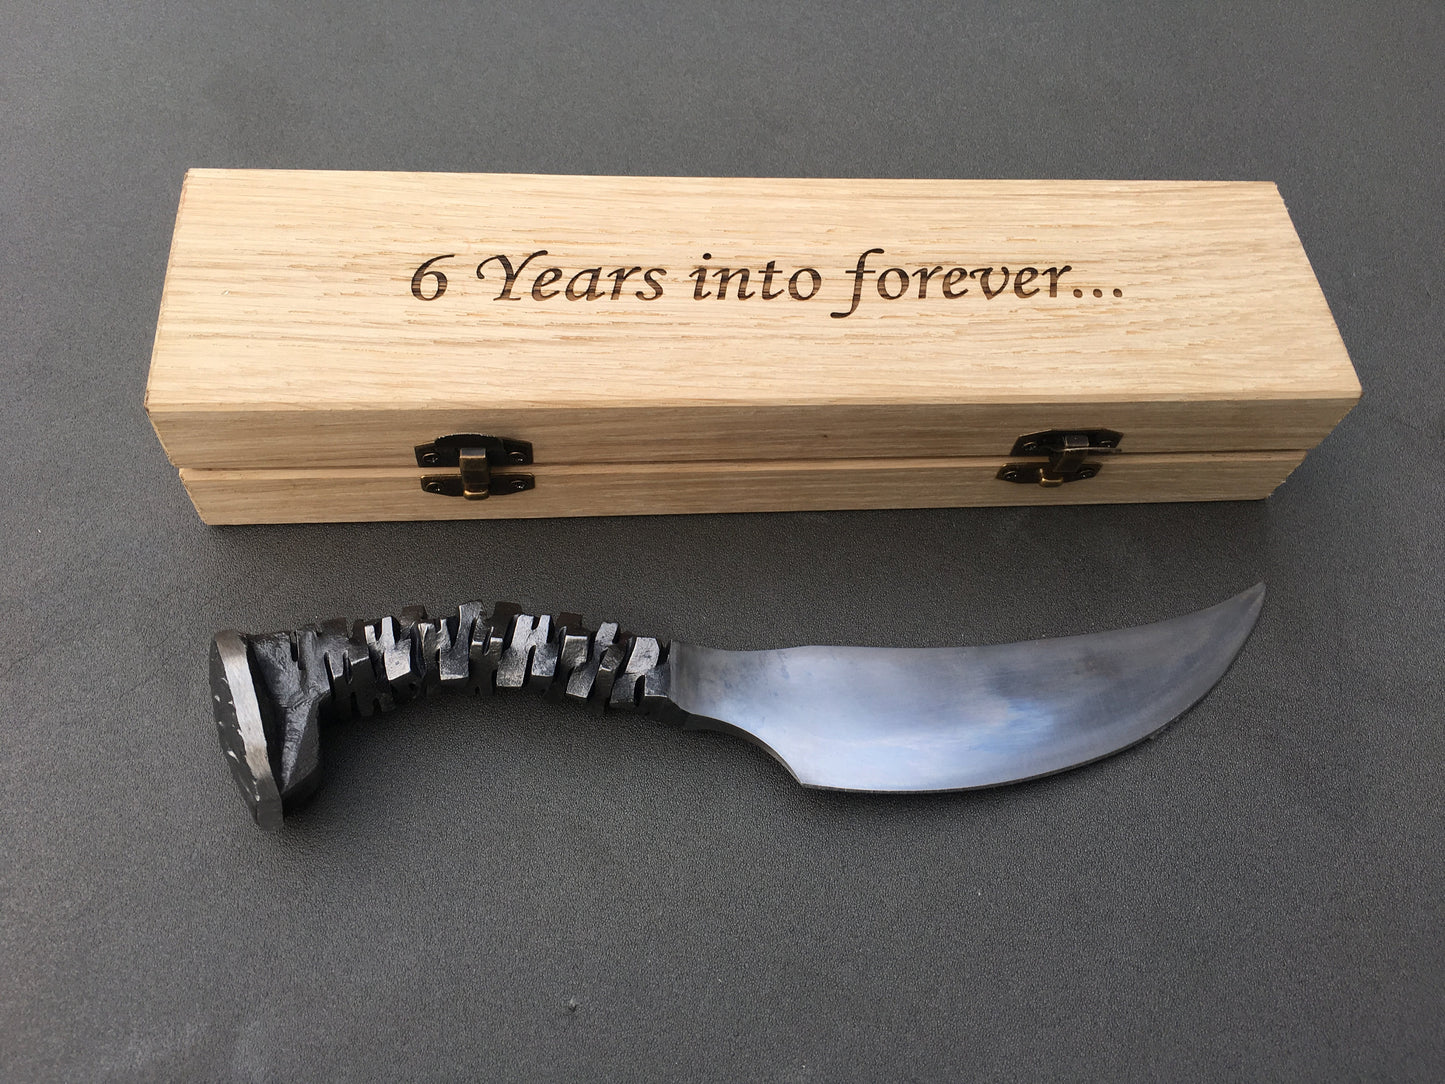 Iron gift for him, mens gifts, engraved knife, railroad spike knife, iron anniversary, knife for groomsman, knife gifts, knife gift box, axe